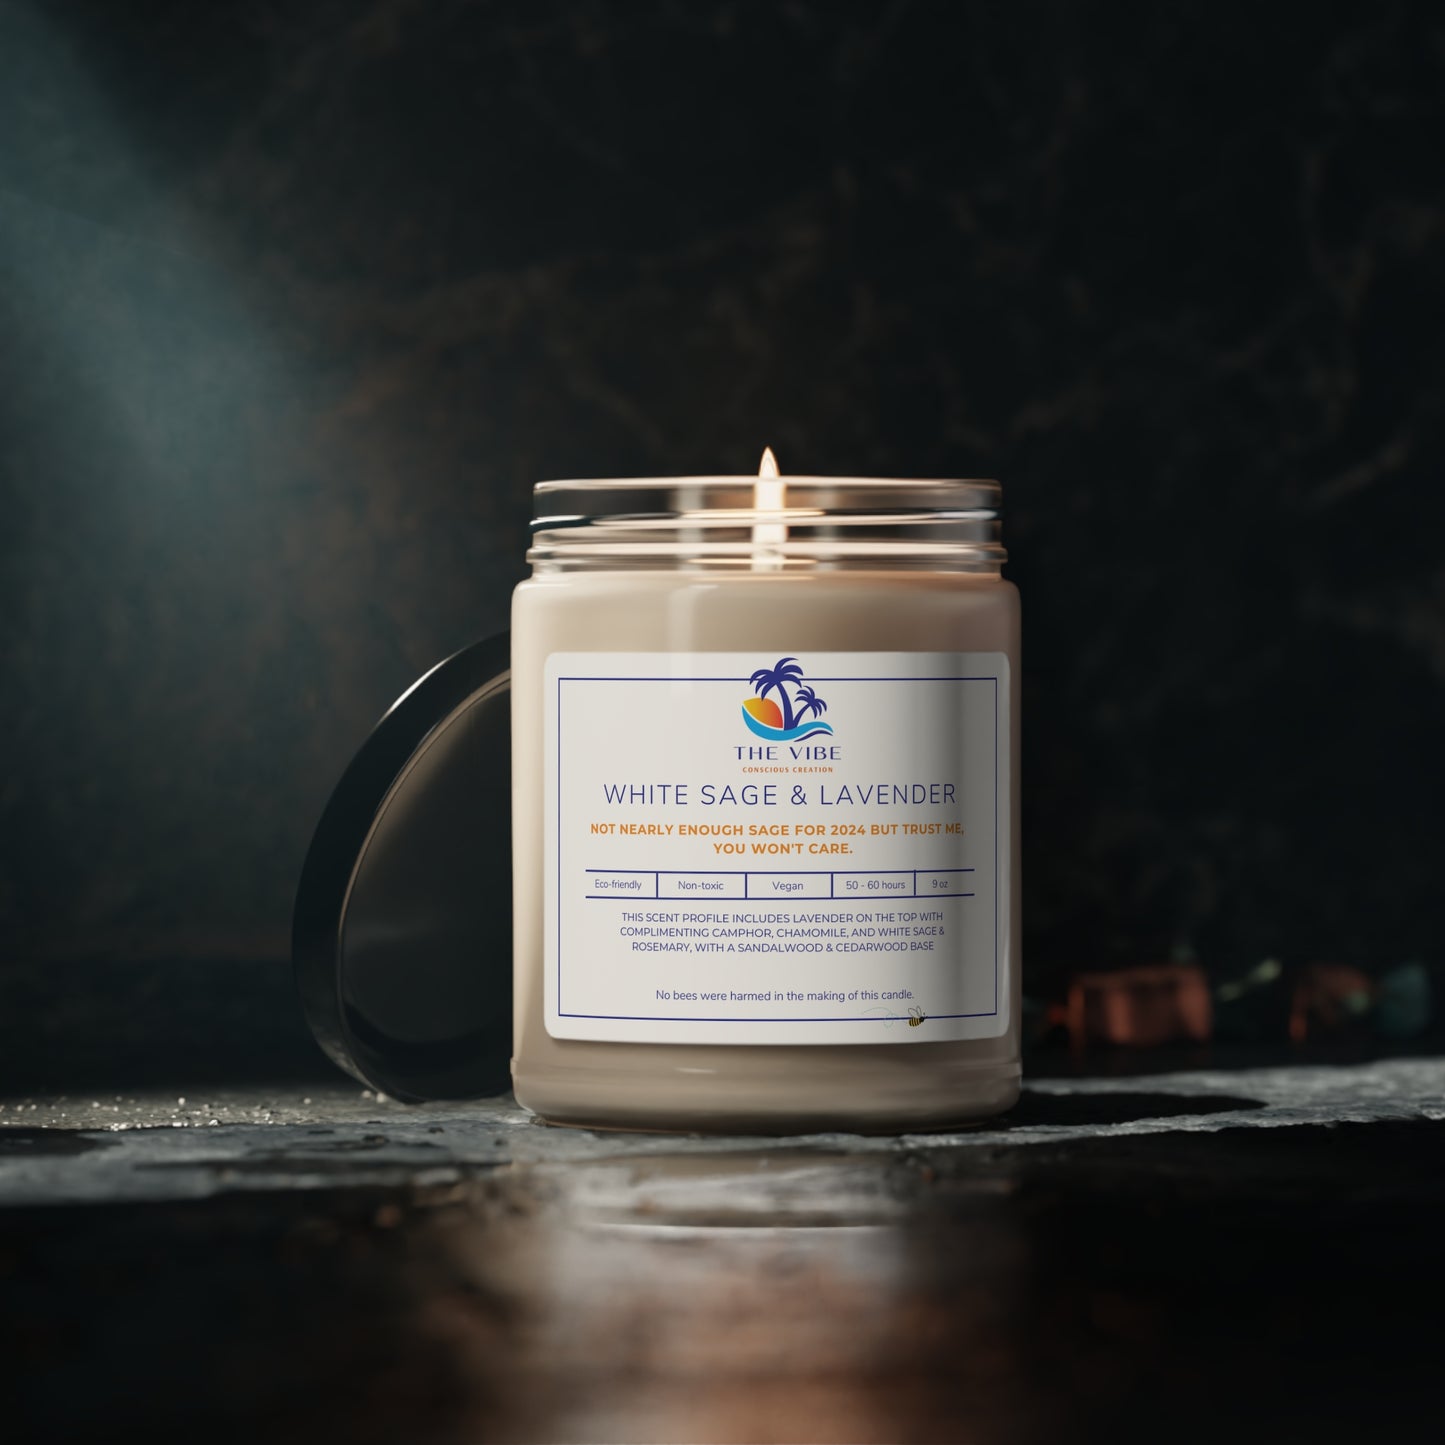 White Sage & Lavender, Quirky Scented Candle 9oz